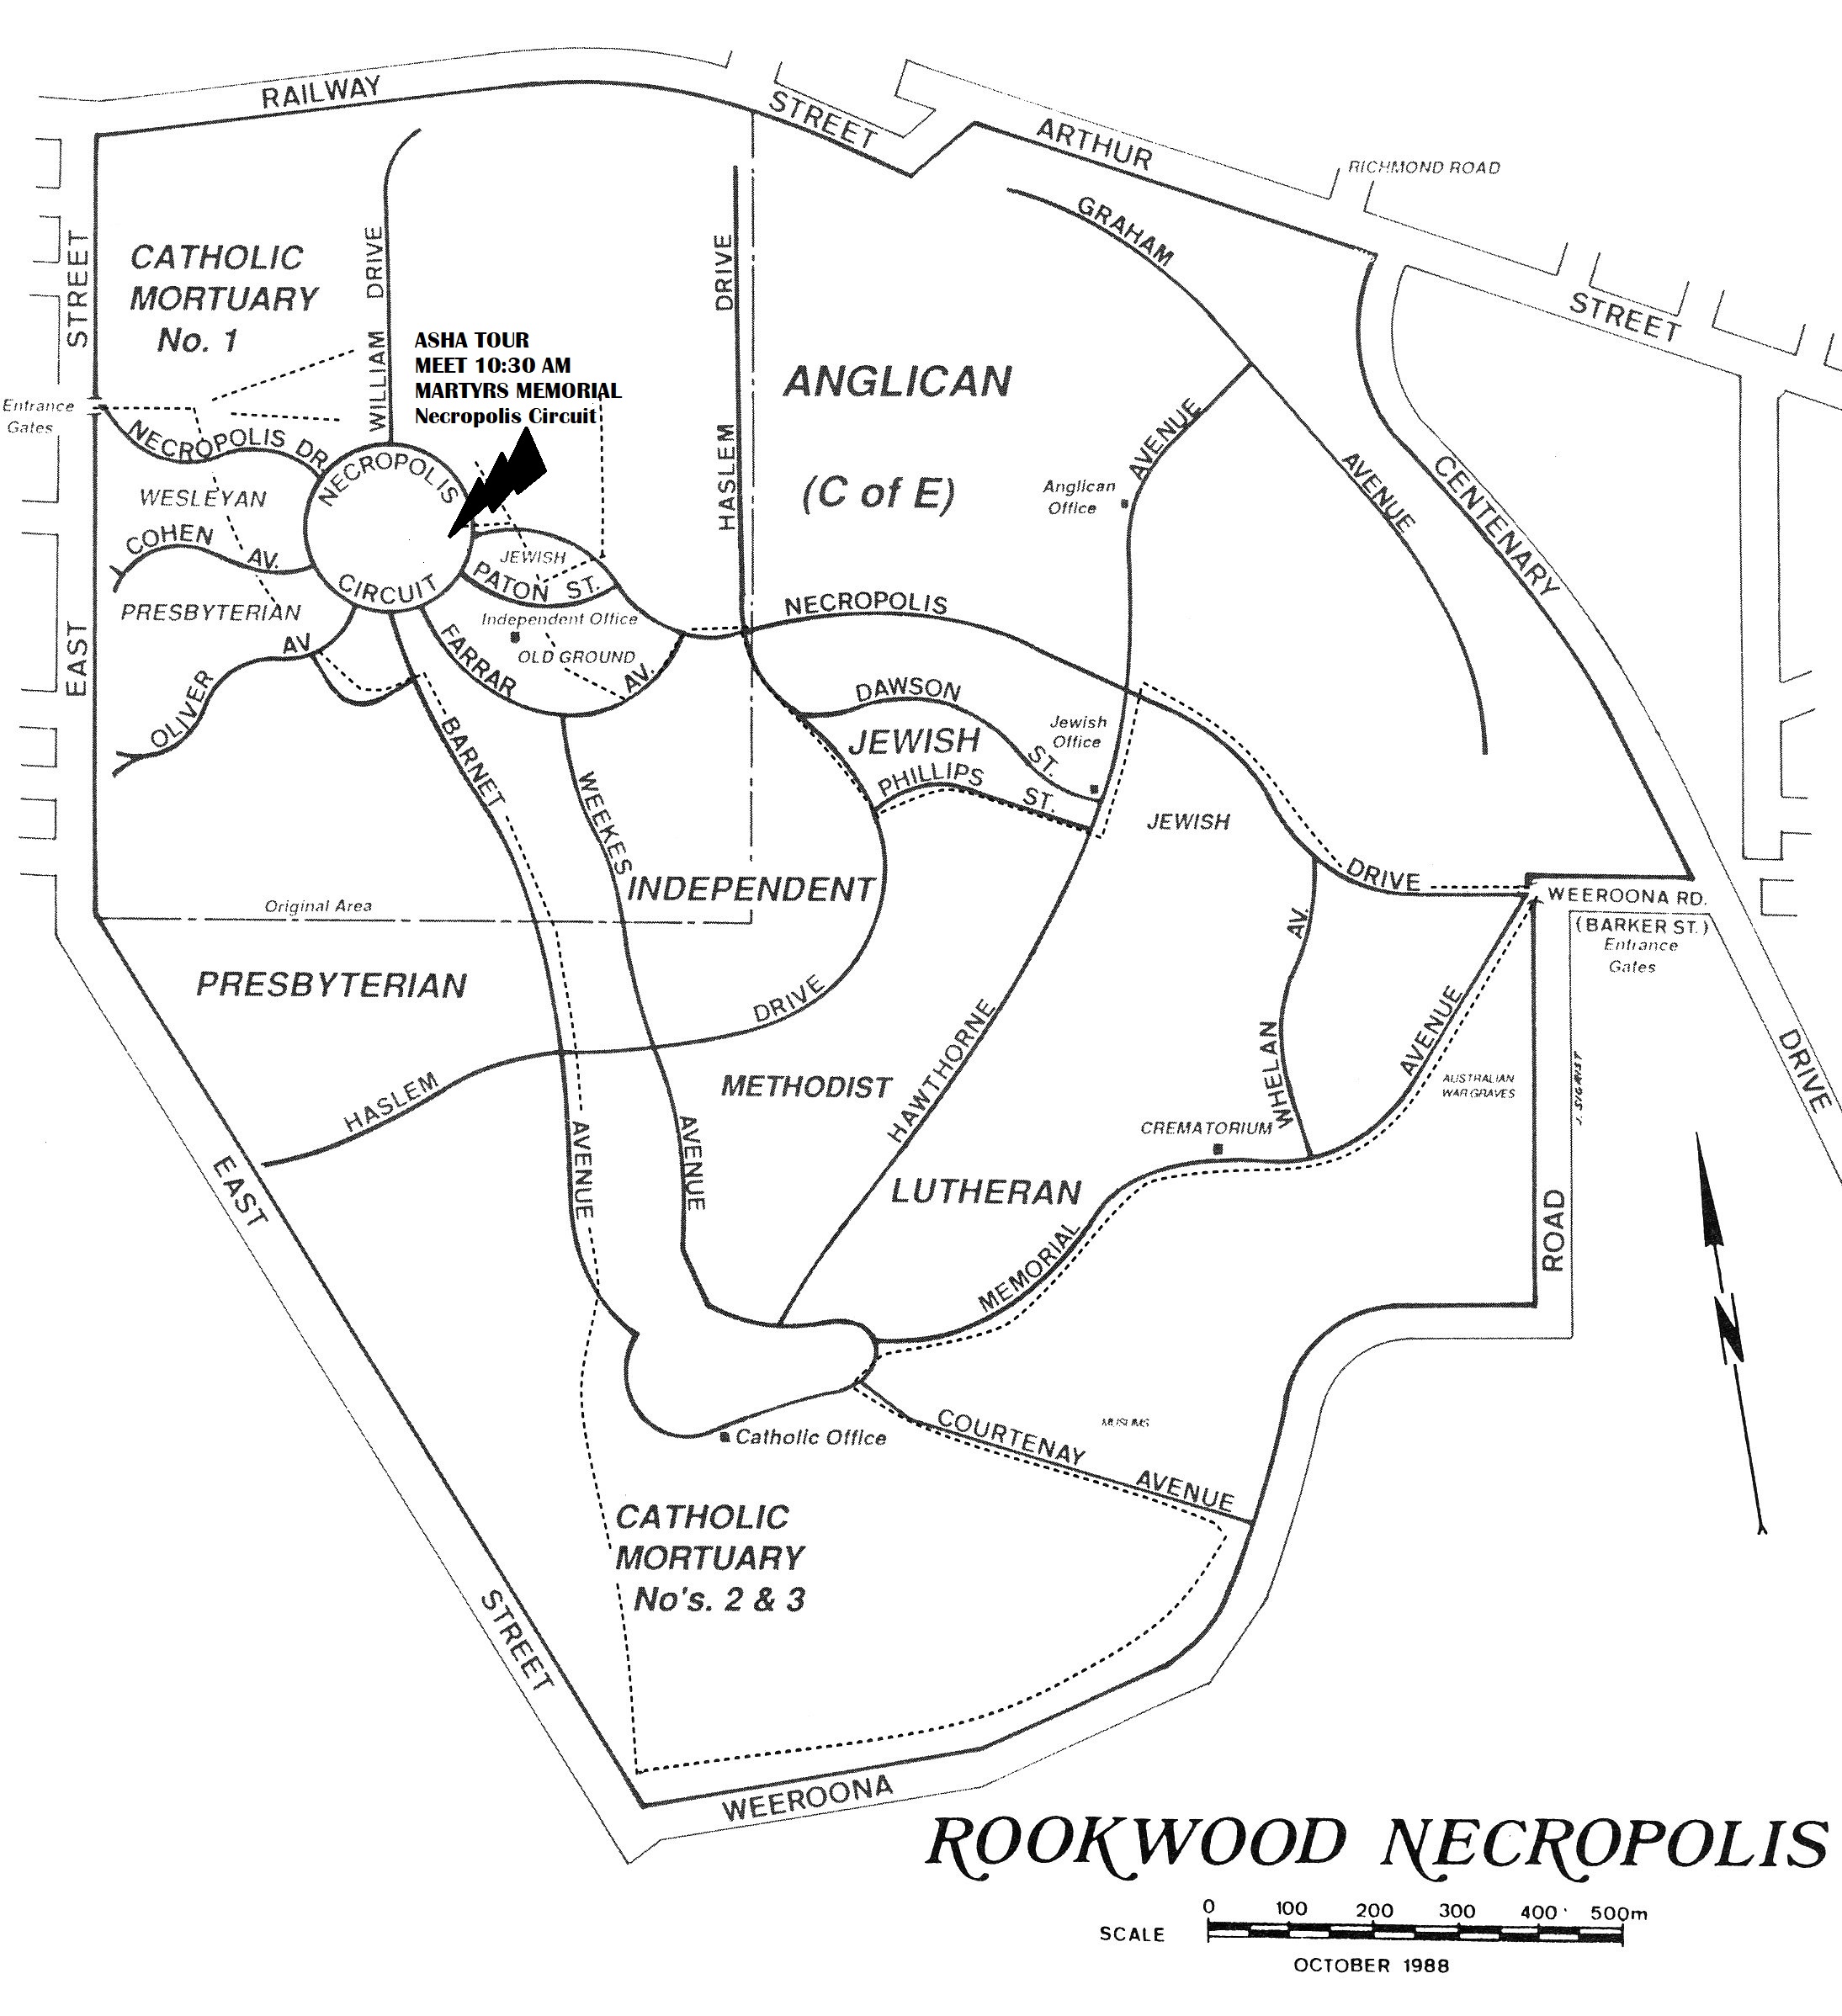 Map of Rookwood Necropolis showing the meeting location.